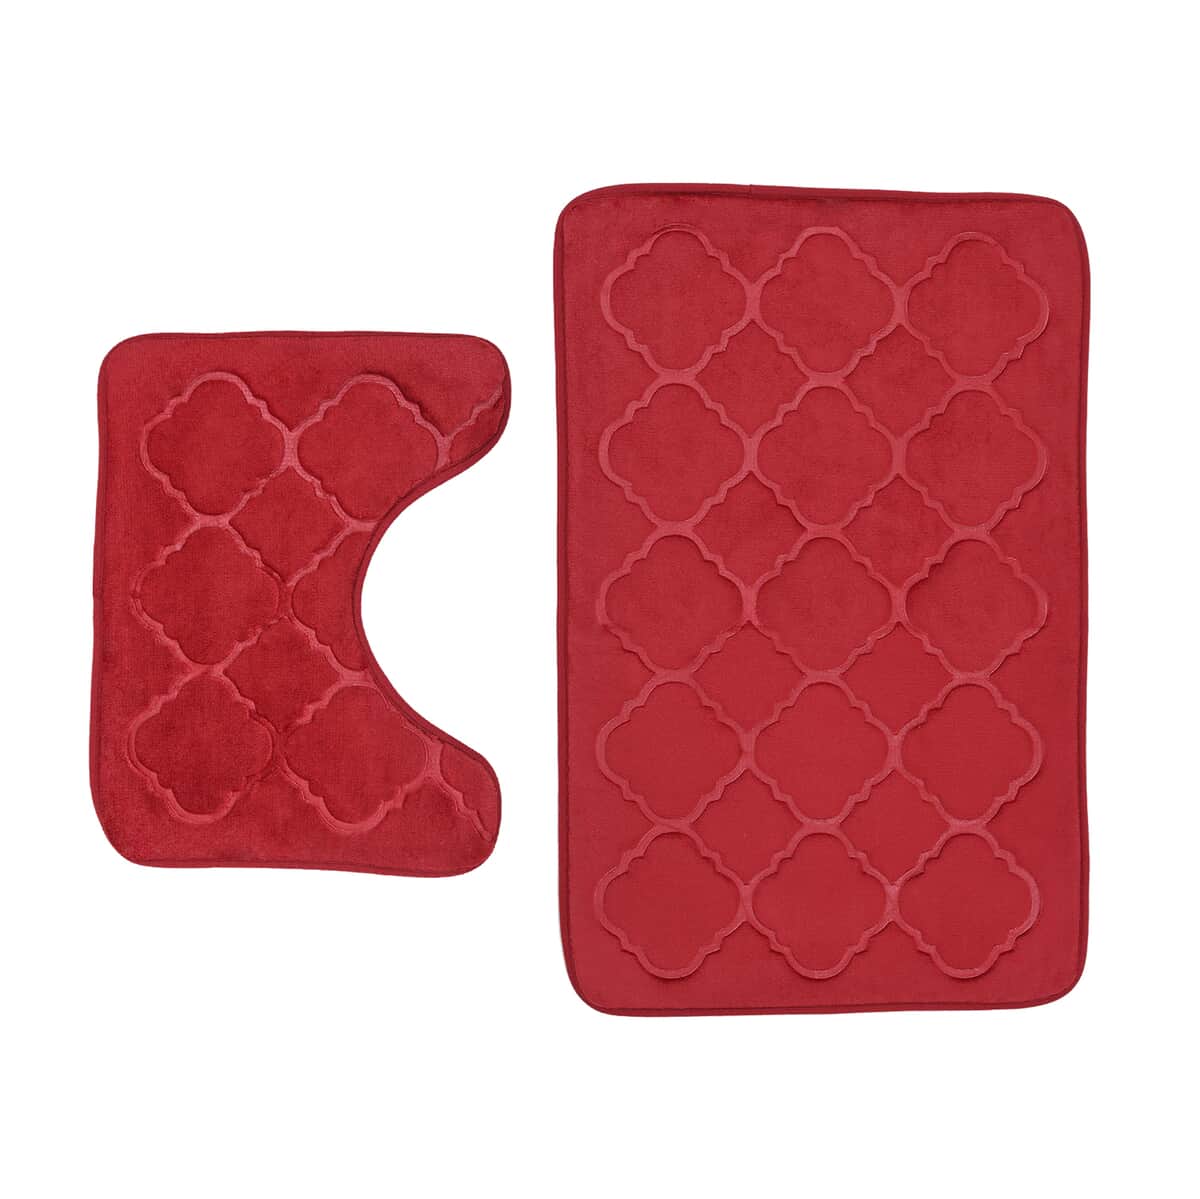 Homesmart Red Embossed Flannel Non-Woven Anti Slip Dot Backing Bath Mat and Contour Toilet Mat, Anti-Skid Quick Drying Handwash Bath Mat, Non Slip Bathroom Rug image number 0